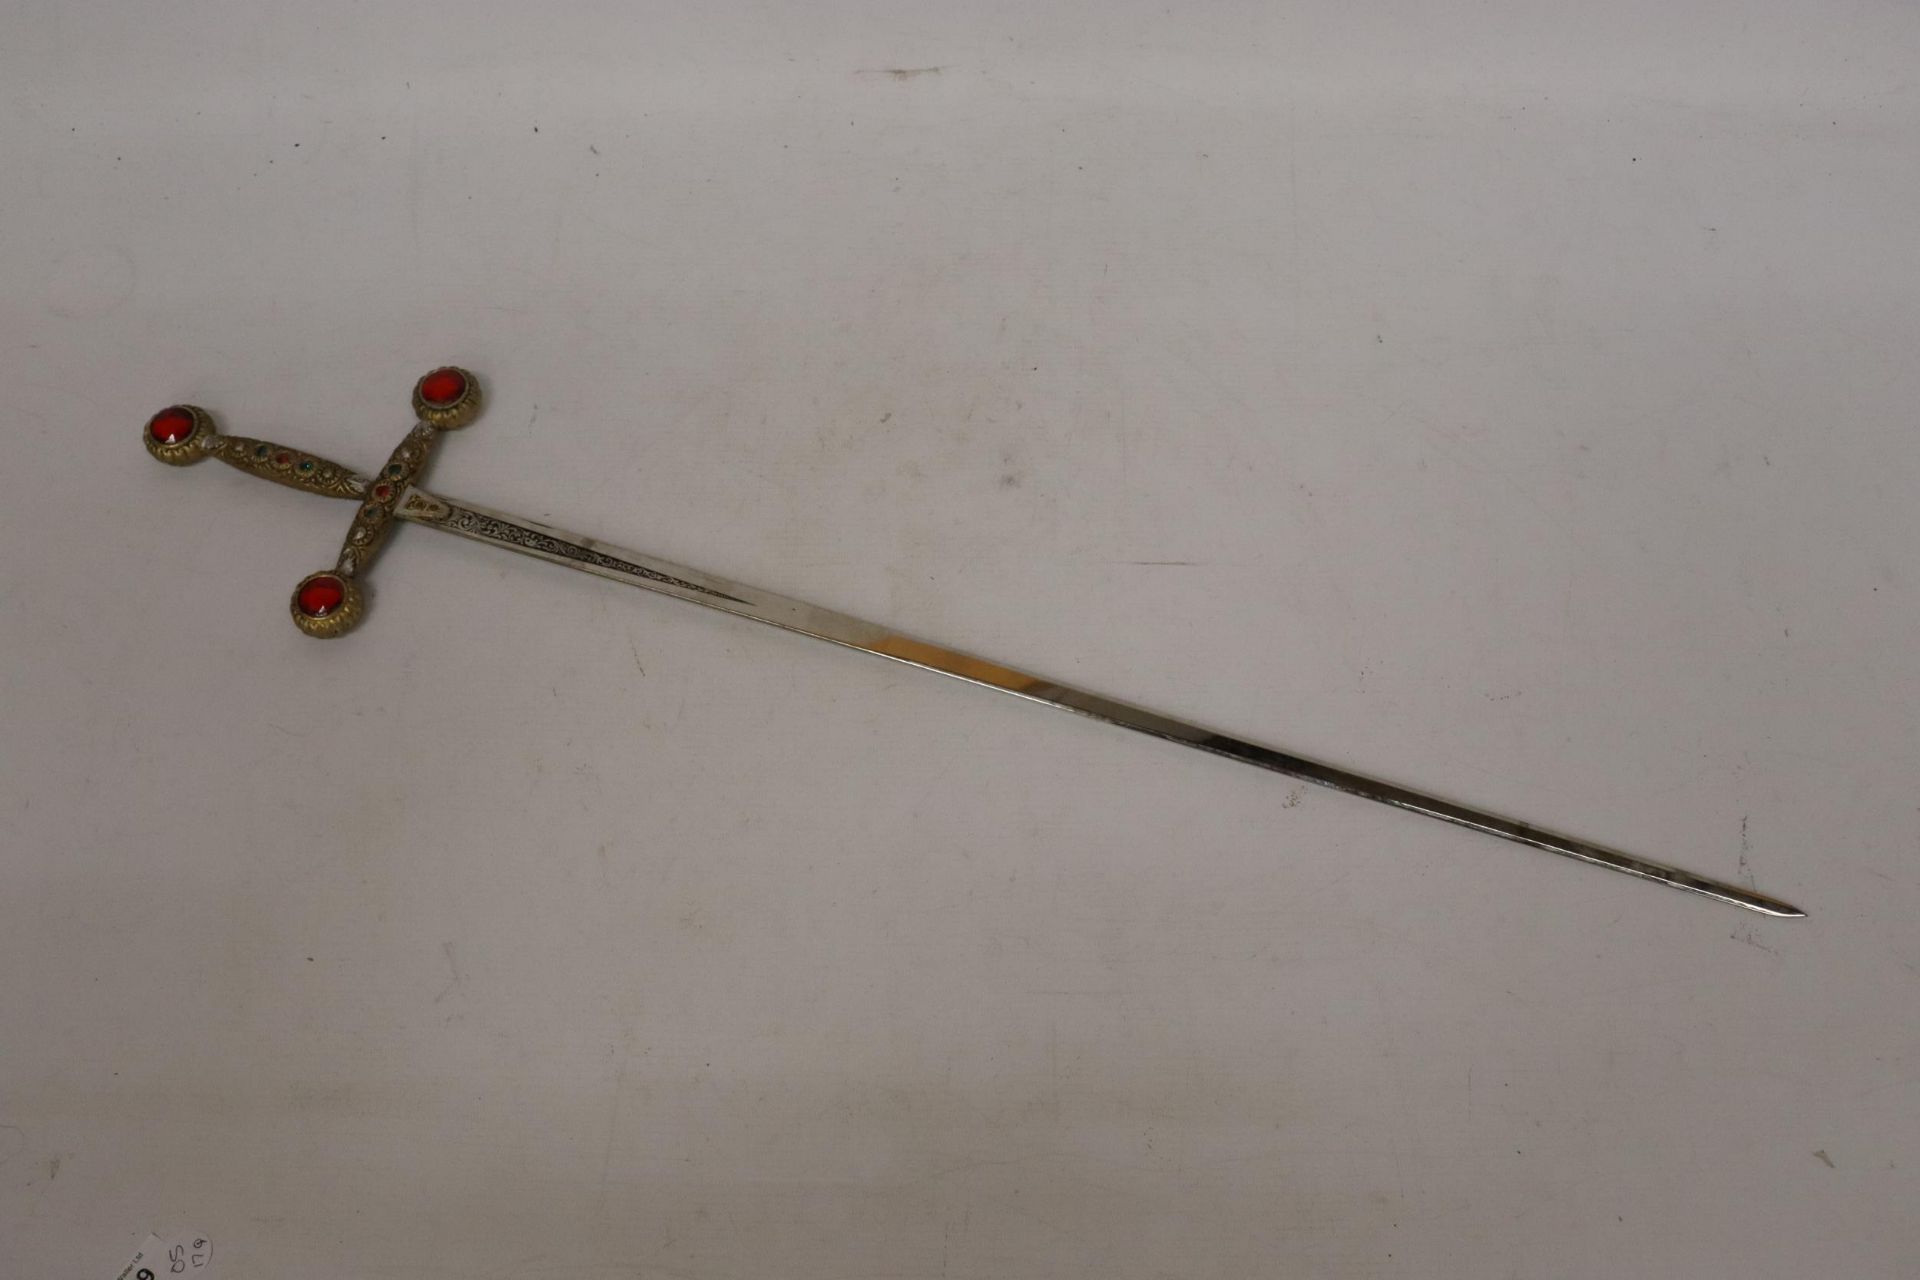 A SPANISH JEWELLED ORNAMENTAL SWORD MADE OF TOLEDO STEEL, LENGTH 31 INCHES